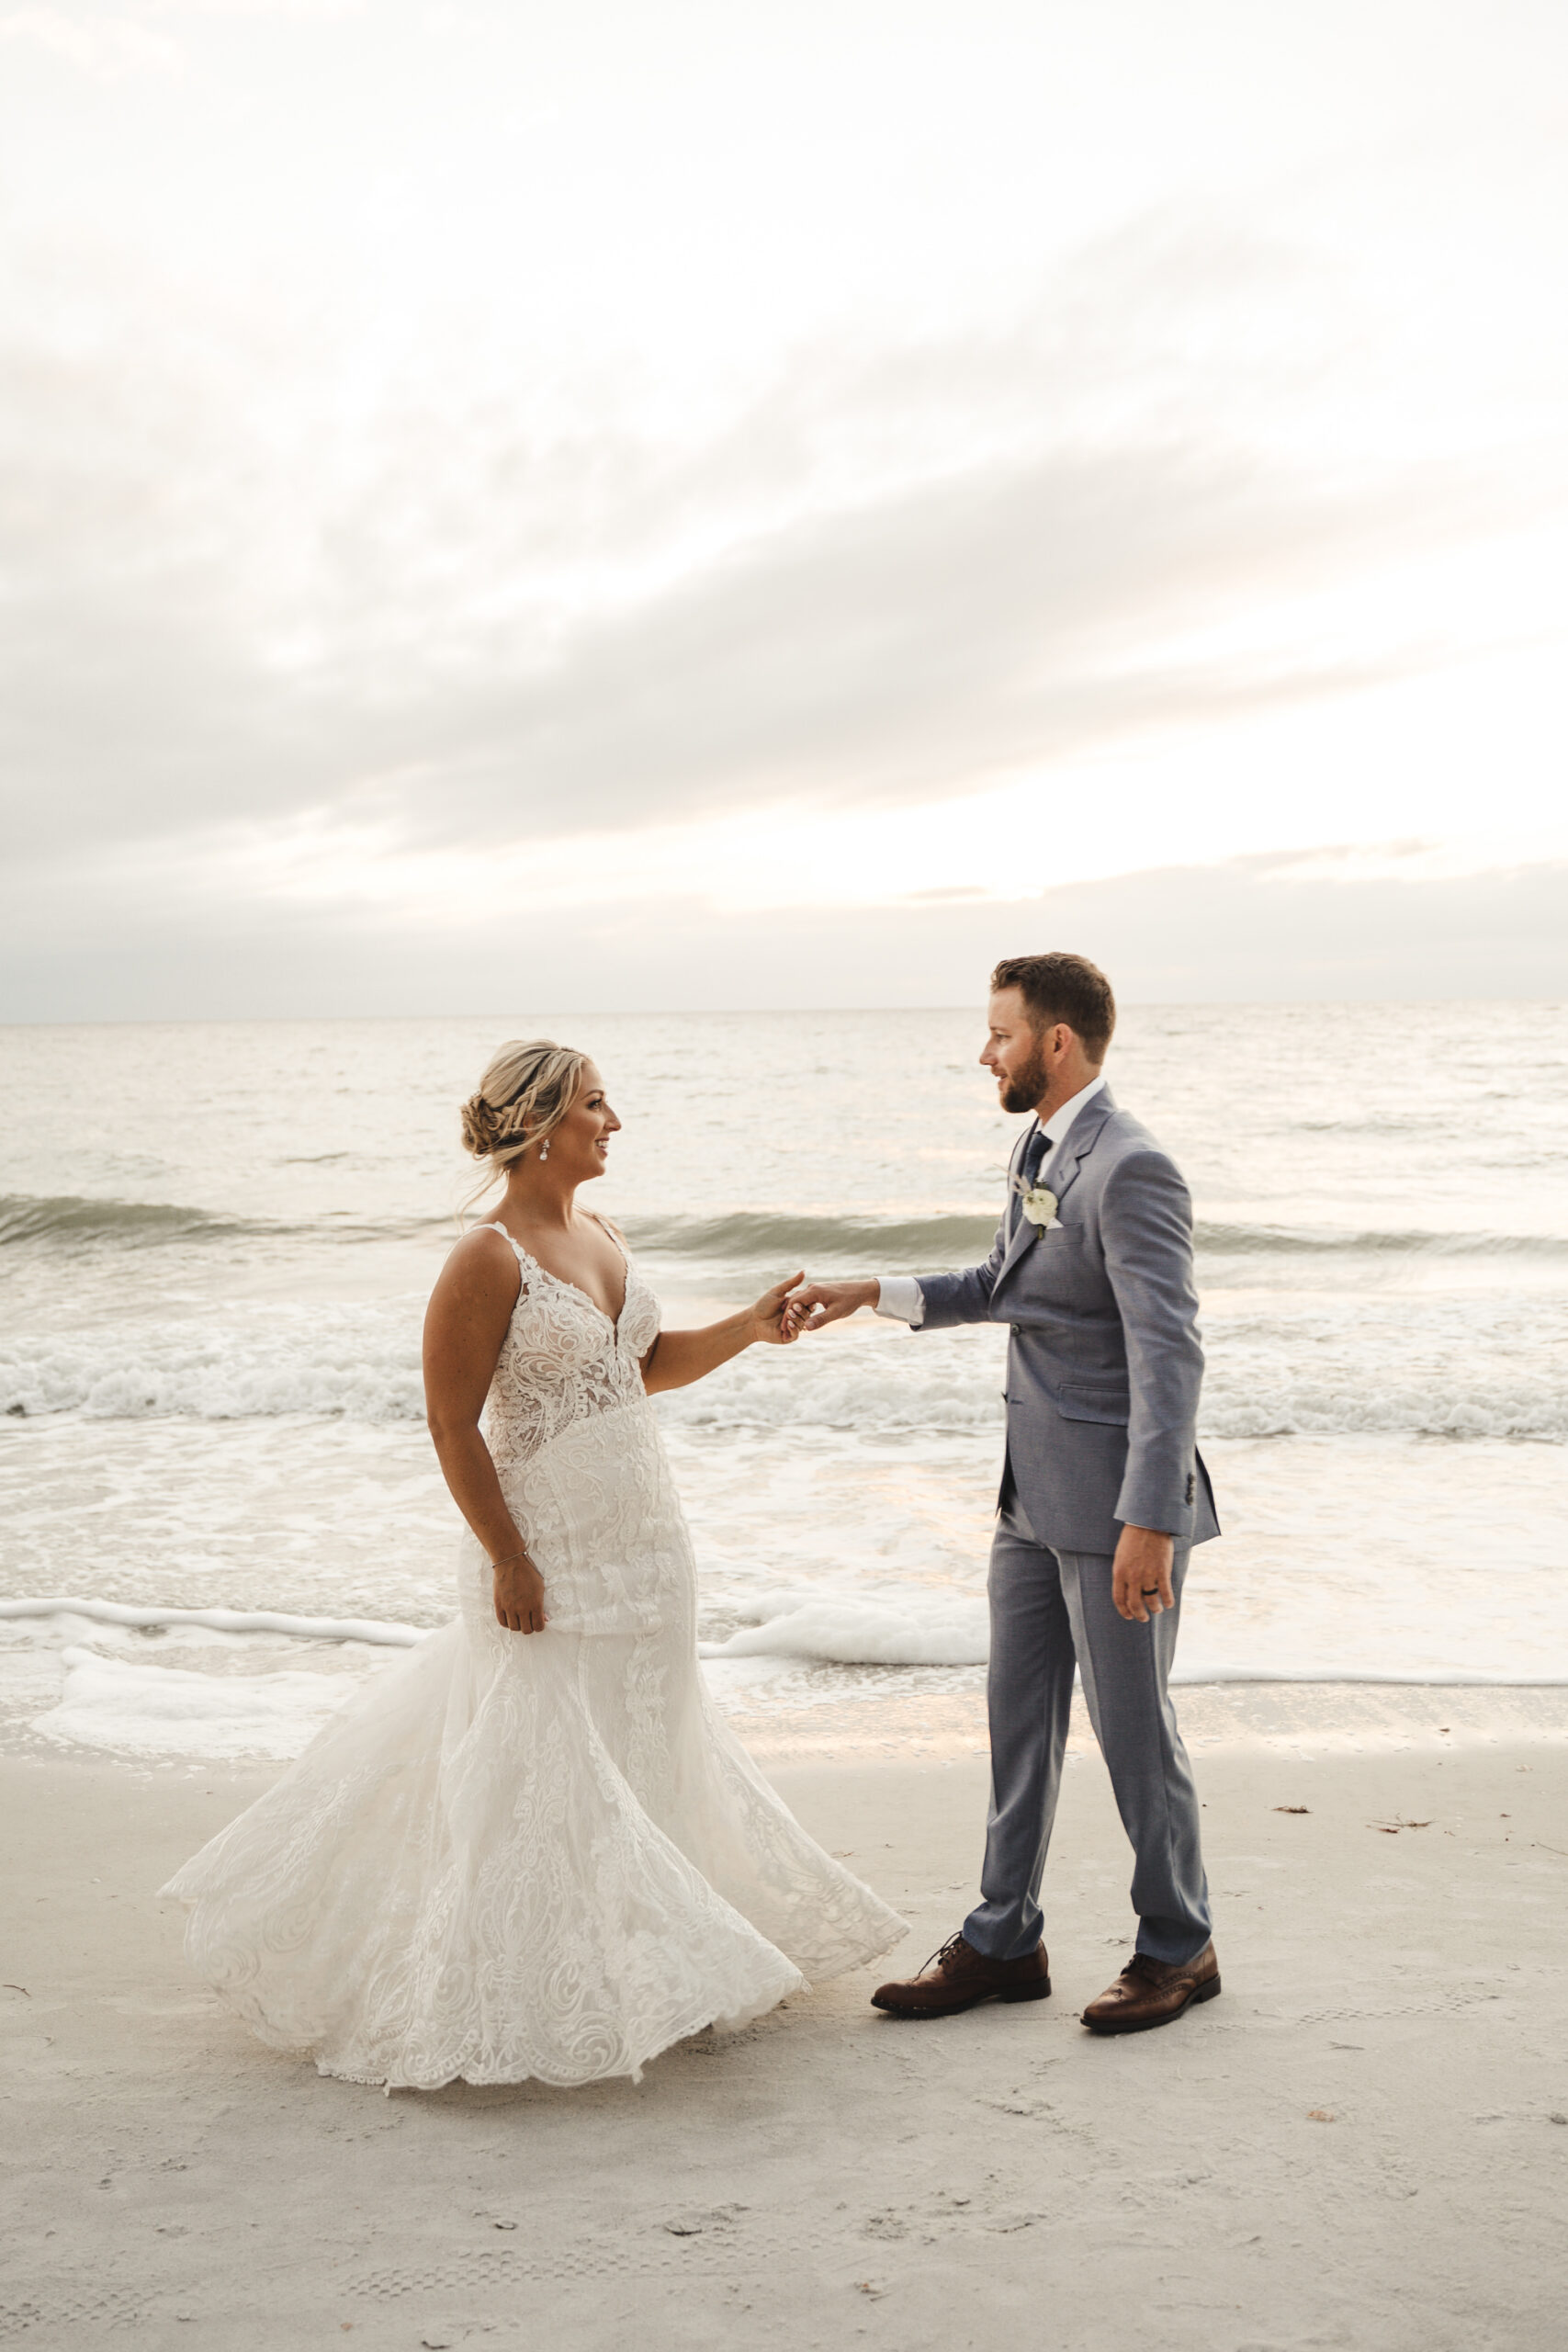 Bride and Groom Treasure Island Beach Wedding Portrait | Ivory Sheer Bodice Lace Mermaid Fit and Flare Wedding Gown Ideas | Tampa Bay Dress Boutique Truly Forever Bridal | Treasure Island Photographer Videographer J&S Media